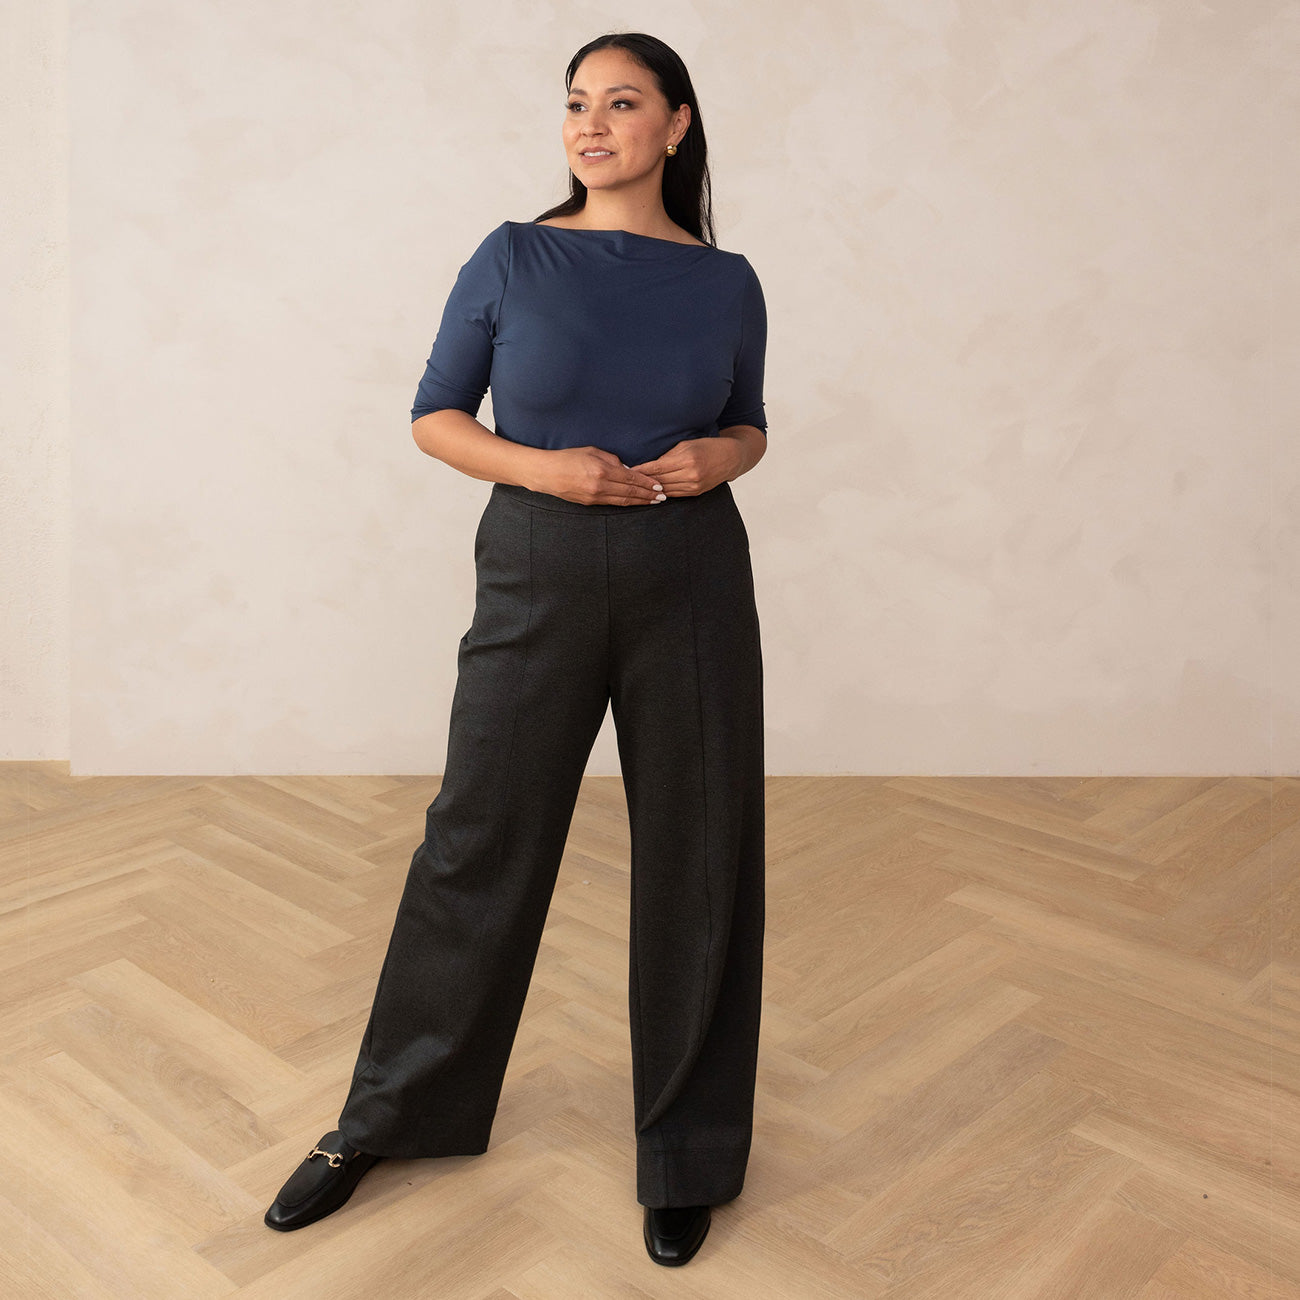 woman wearing a navy blue boat neck top and grey high waisted wide leg trouser pants